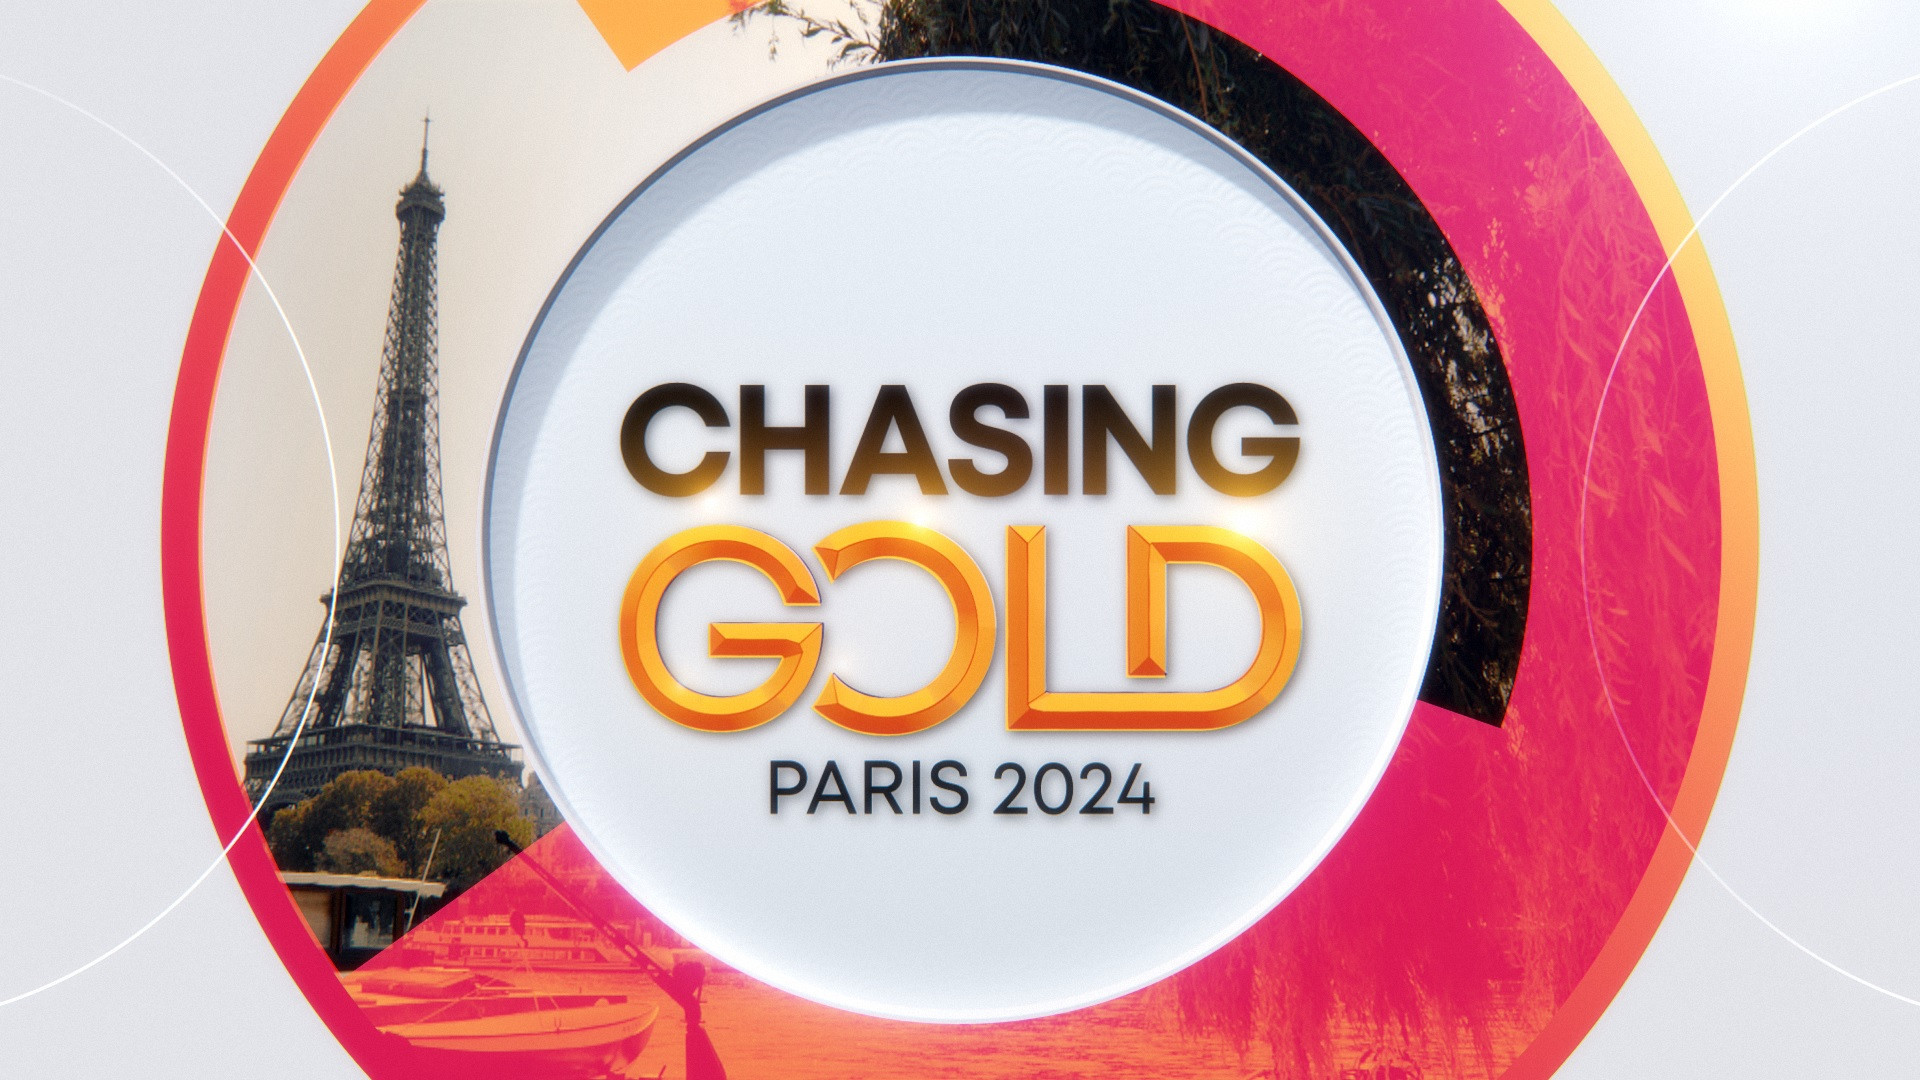 Chasing Gold: Paris 2024 is due to be aired every month on Peacock ©NBC Sports